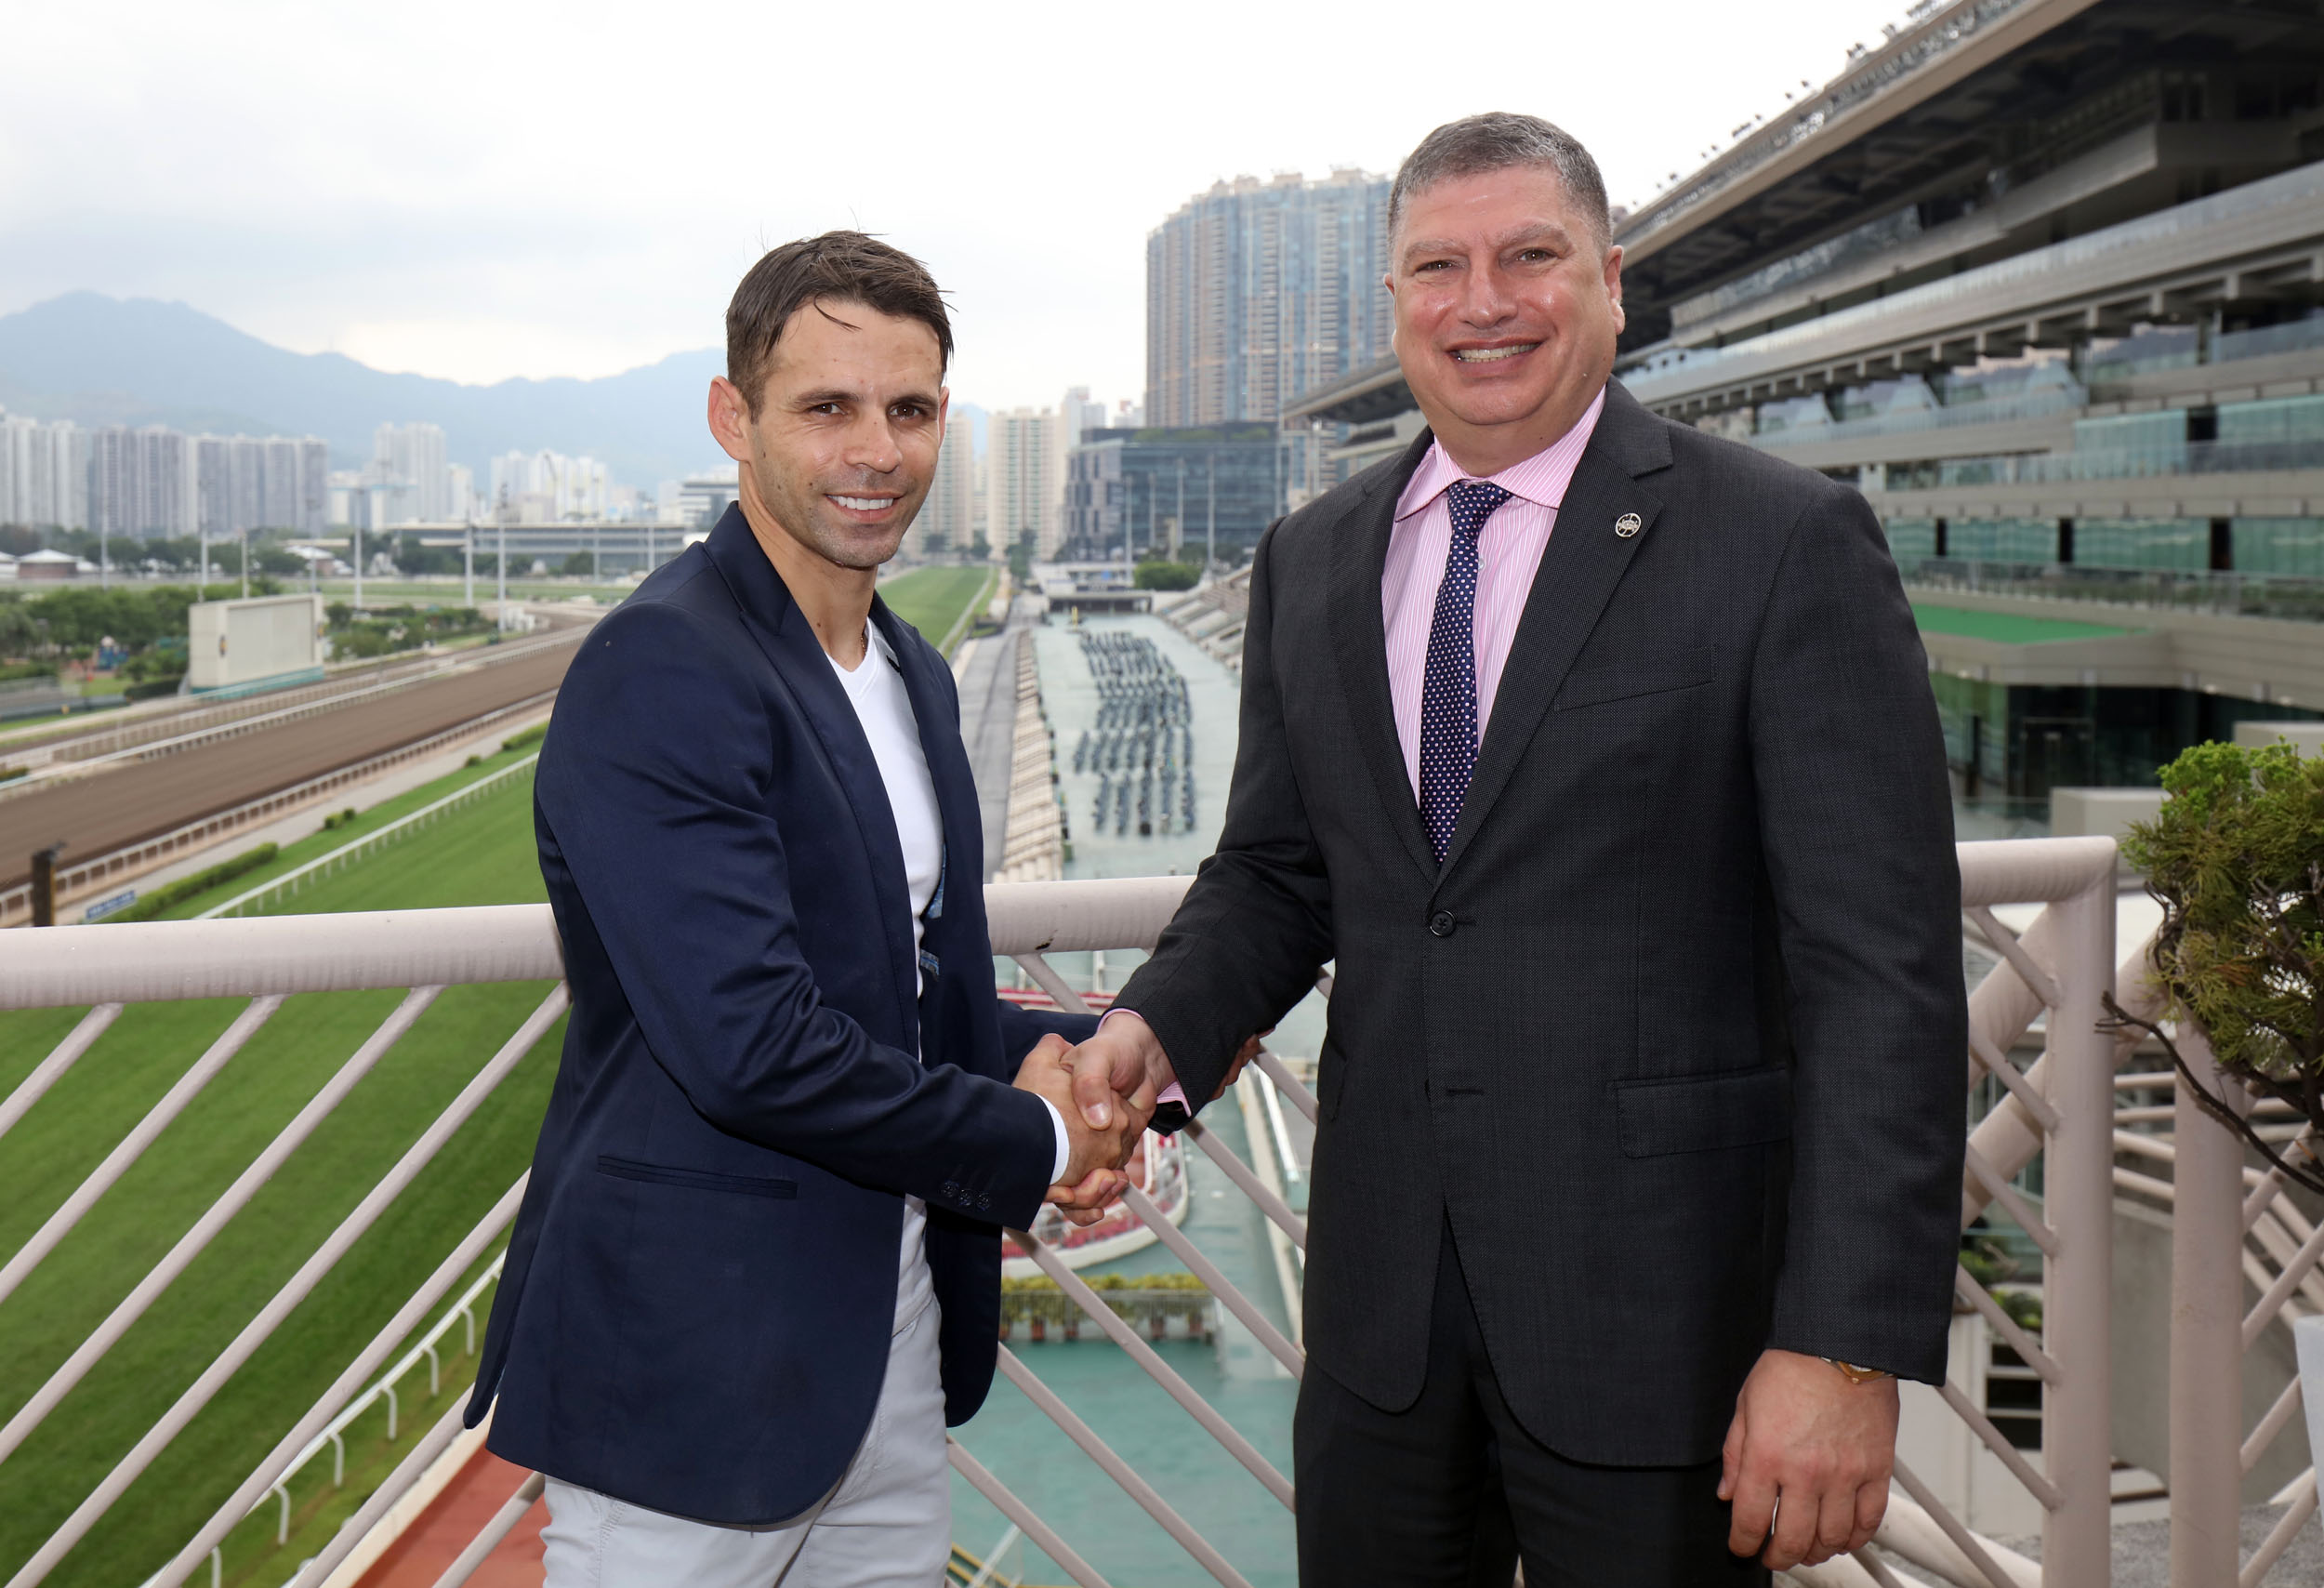 HKJC Director of Racing Business and Operations Mr. Bill Nader welcomes Aldo Domeyer.